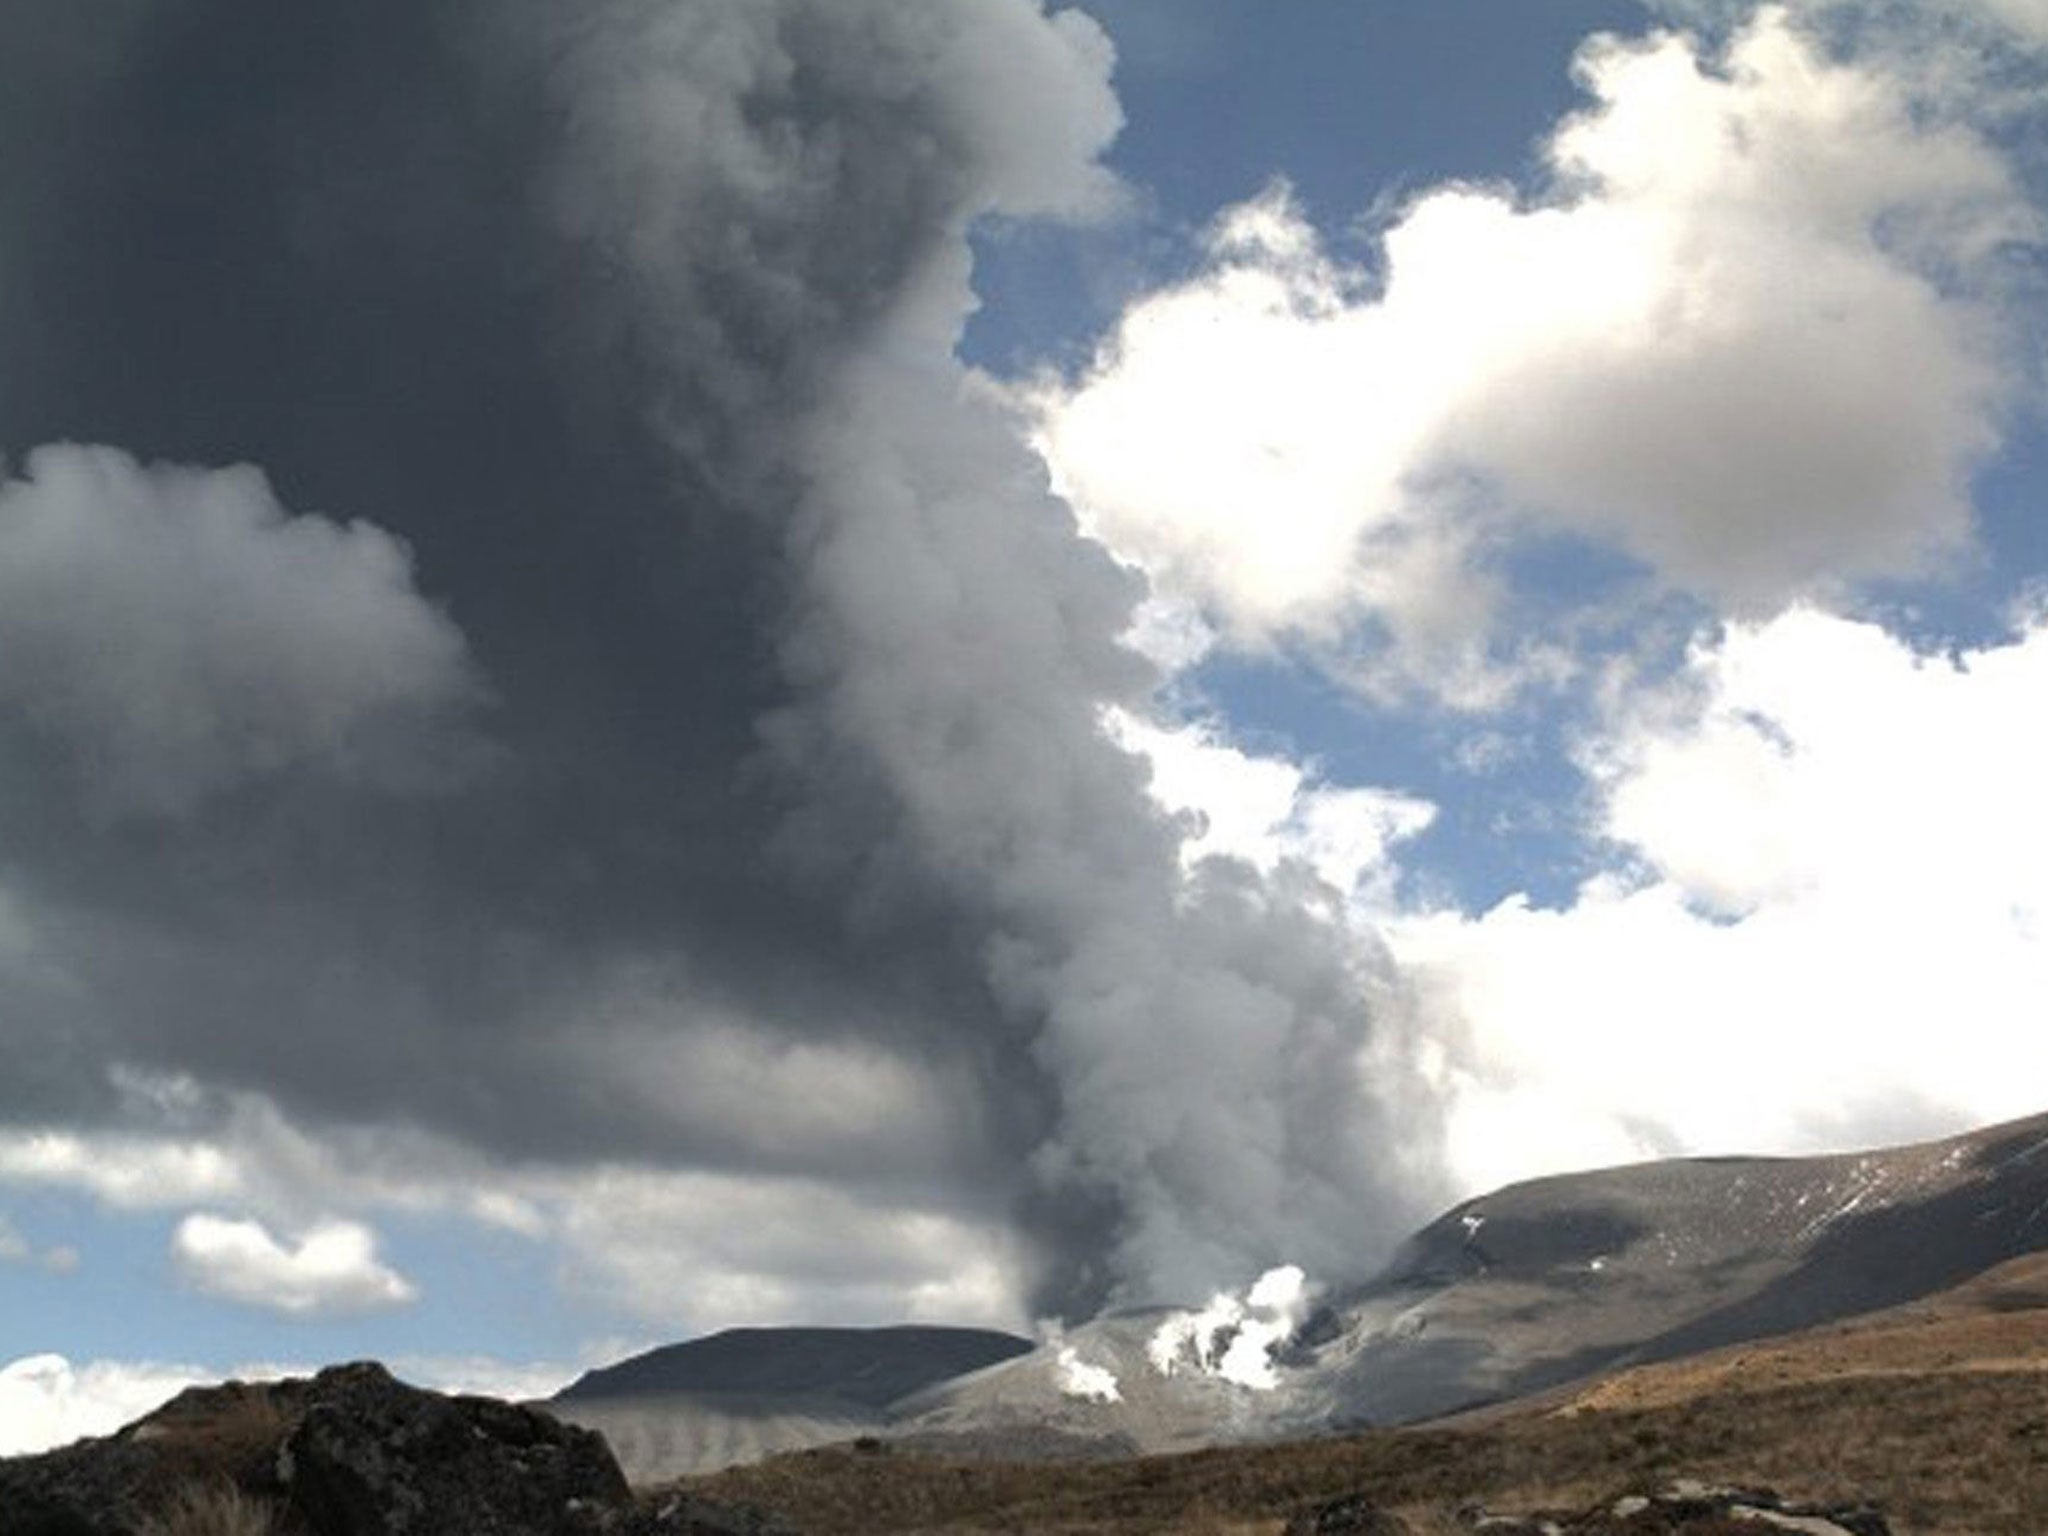 The eruption of Mount Tongariro sent a dark ash plume into the sky